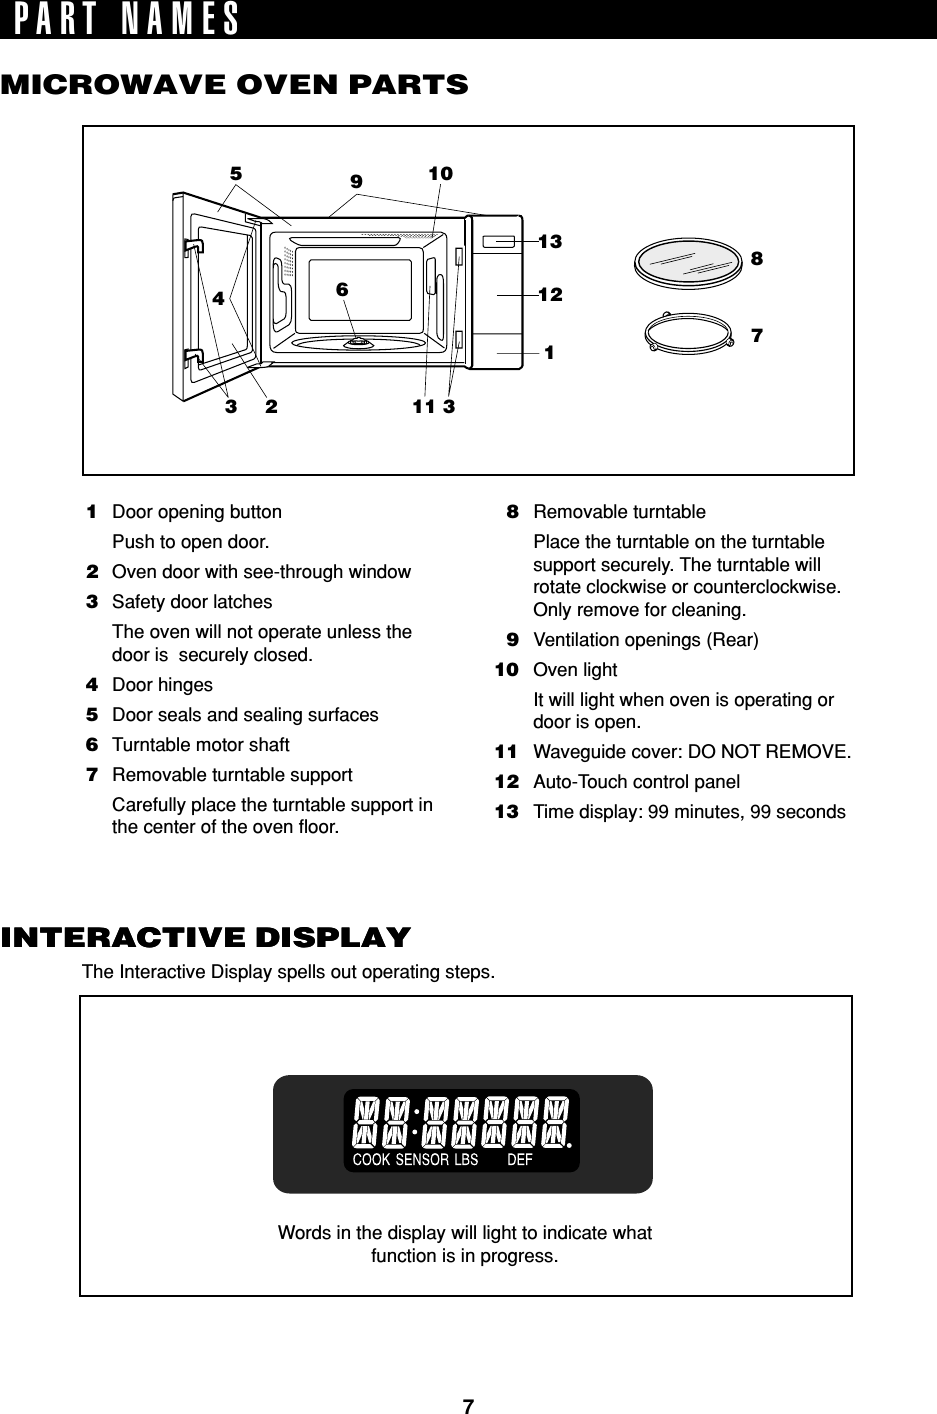 7Words in the display will light to indicate whatfunction is in progress.PART NAMESMICROWAVE OVEN PARTS1Door opening buttonPush to open door.2Oven door with see-through window3Safety door latchesThe oven will not operate unless thedoor is  securely closed.4Door hinges5Door seals and sealing surfaces6Turntable motor shaft7Removable turntable supportCarefully place the turntable support inthe center of the oven floor.8Removable turntablePlace the turntable on the turntablesupport securely. The turntable willrotate clockwise or counterclockwise.Only remove for cleaning.9Ventilation openings (Rear)10 Oven lightIt will light when oven is operating ordoor is open.11 Waveguide cover: DO NOT REMOVE.12 Auto-Touch control panel13 Time display: 99 minutes, 99 secondsINTERACTIVE DISPLAY510911 332416131287INTERACTIVE DISPLAYThe Interactive Display spells out operating steps.